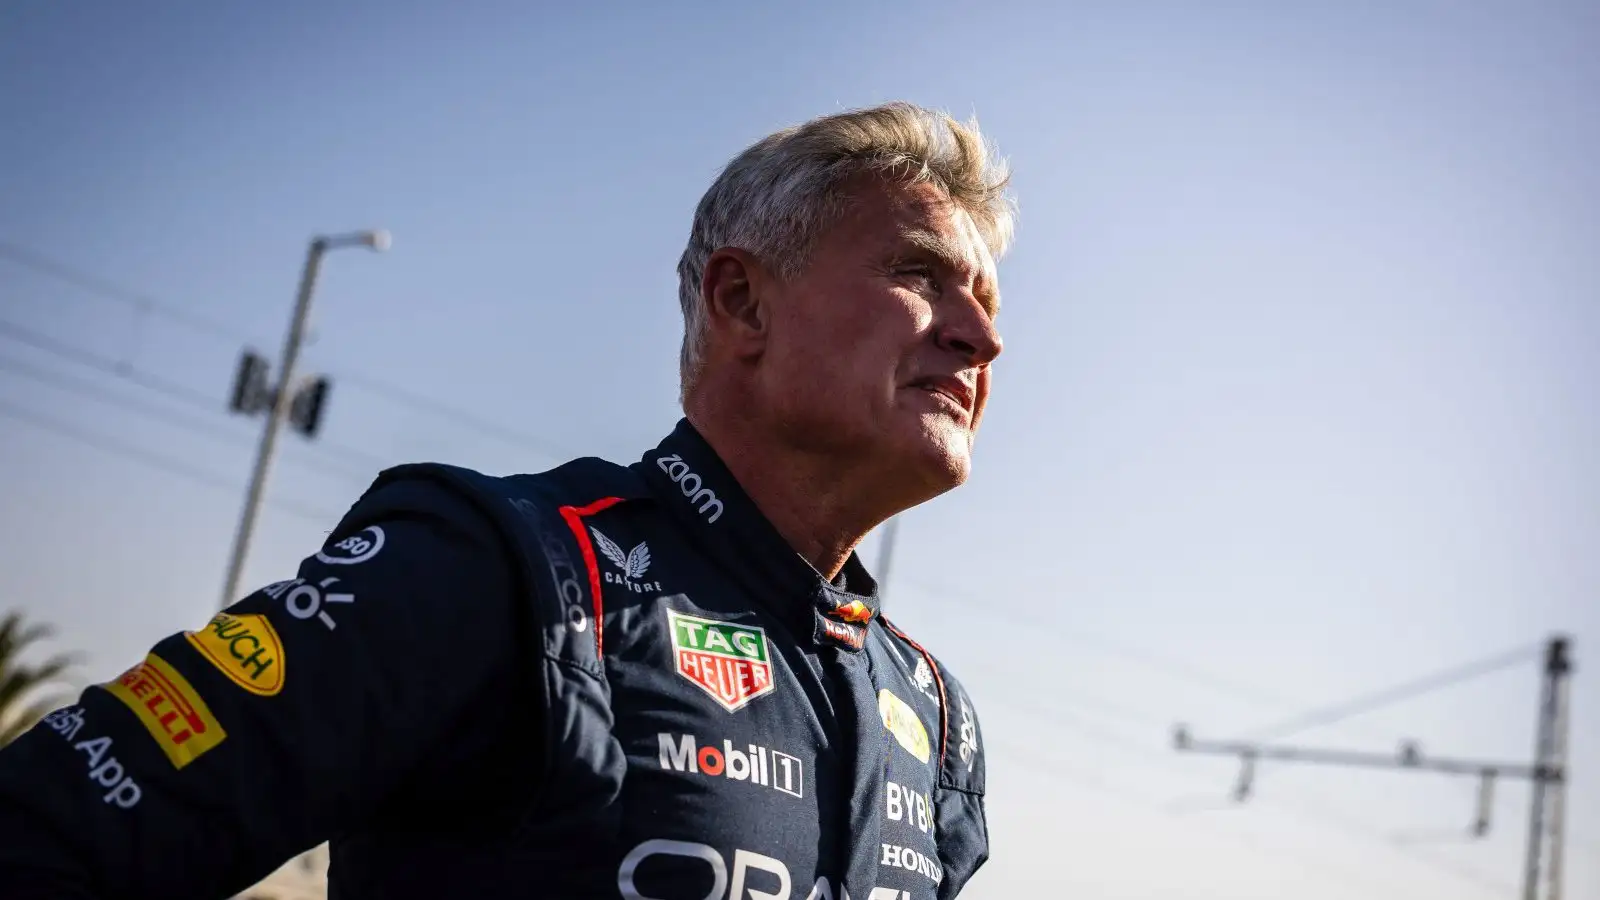 Former Red Bull driver David Coulthard in Red Bull kit at a demo event in Portugal